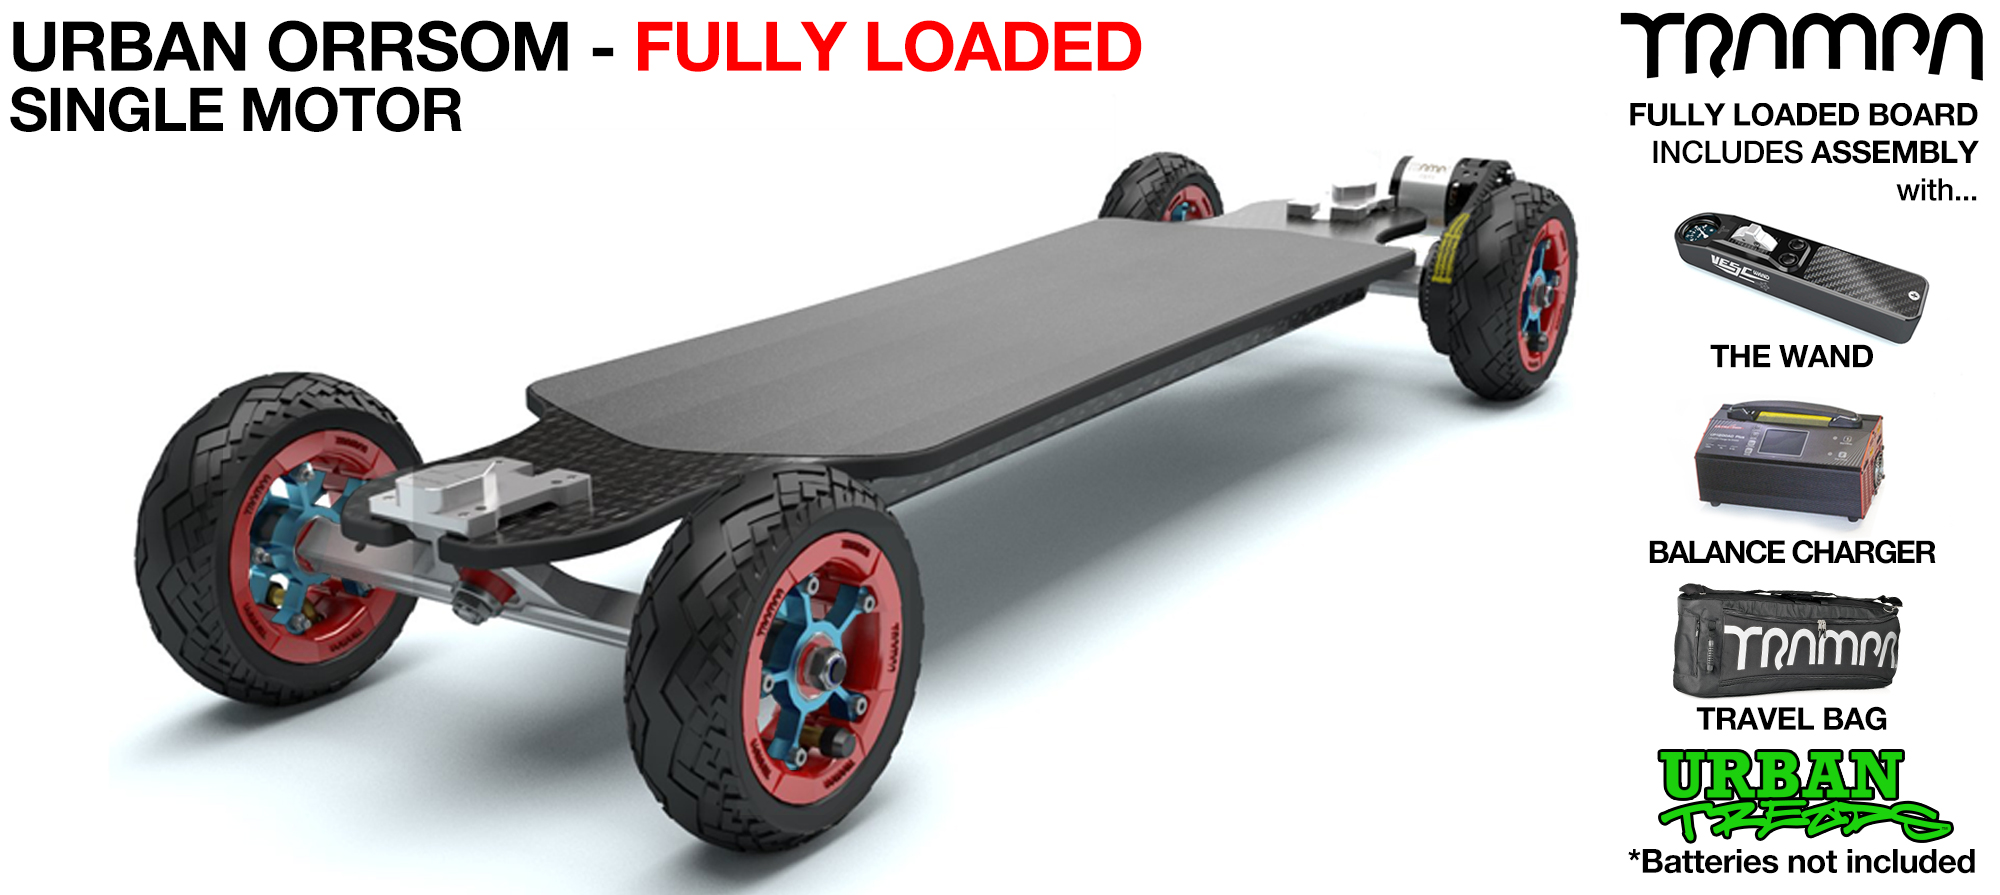 TRAMPA's 12FiFties ORRSOM Electric Longboard with URBAN TREADS Pneumatic Tyres - SINGLE MOTOR FULLY LOADED